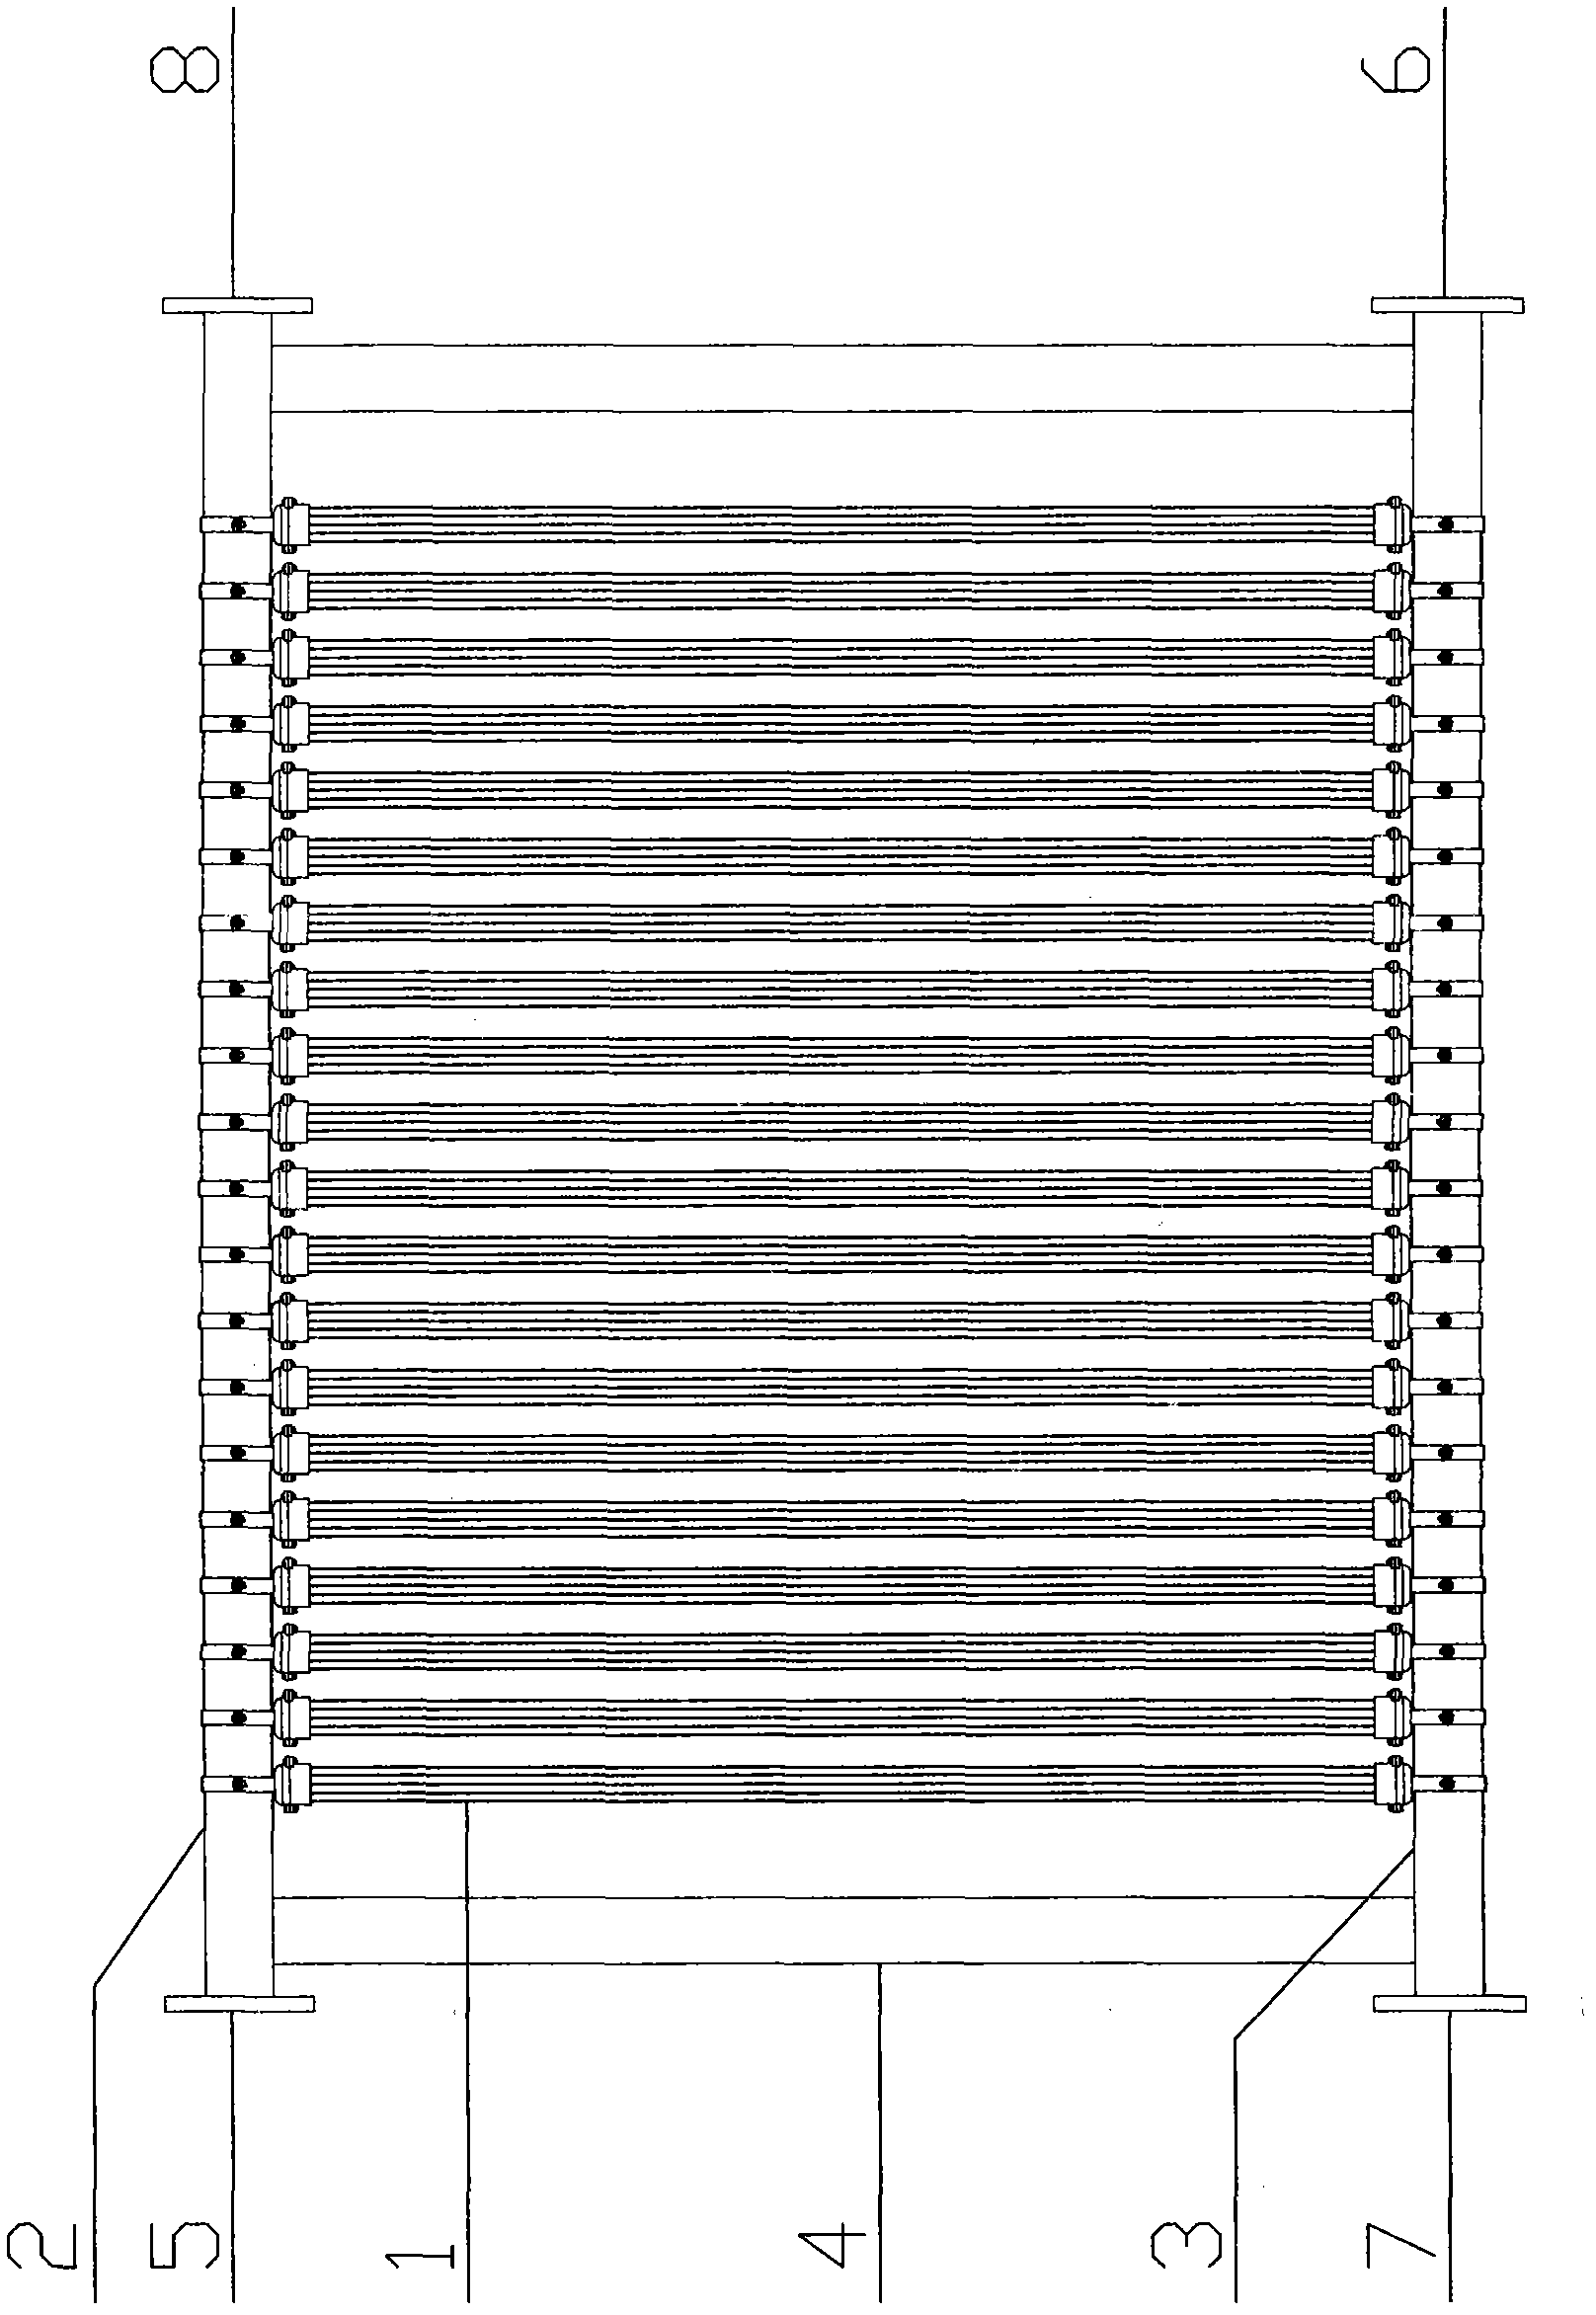 Inner-aeration hollow fiber film carrier module and its application method